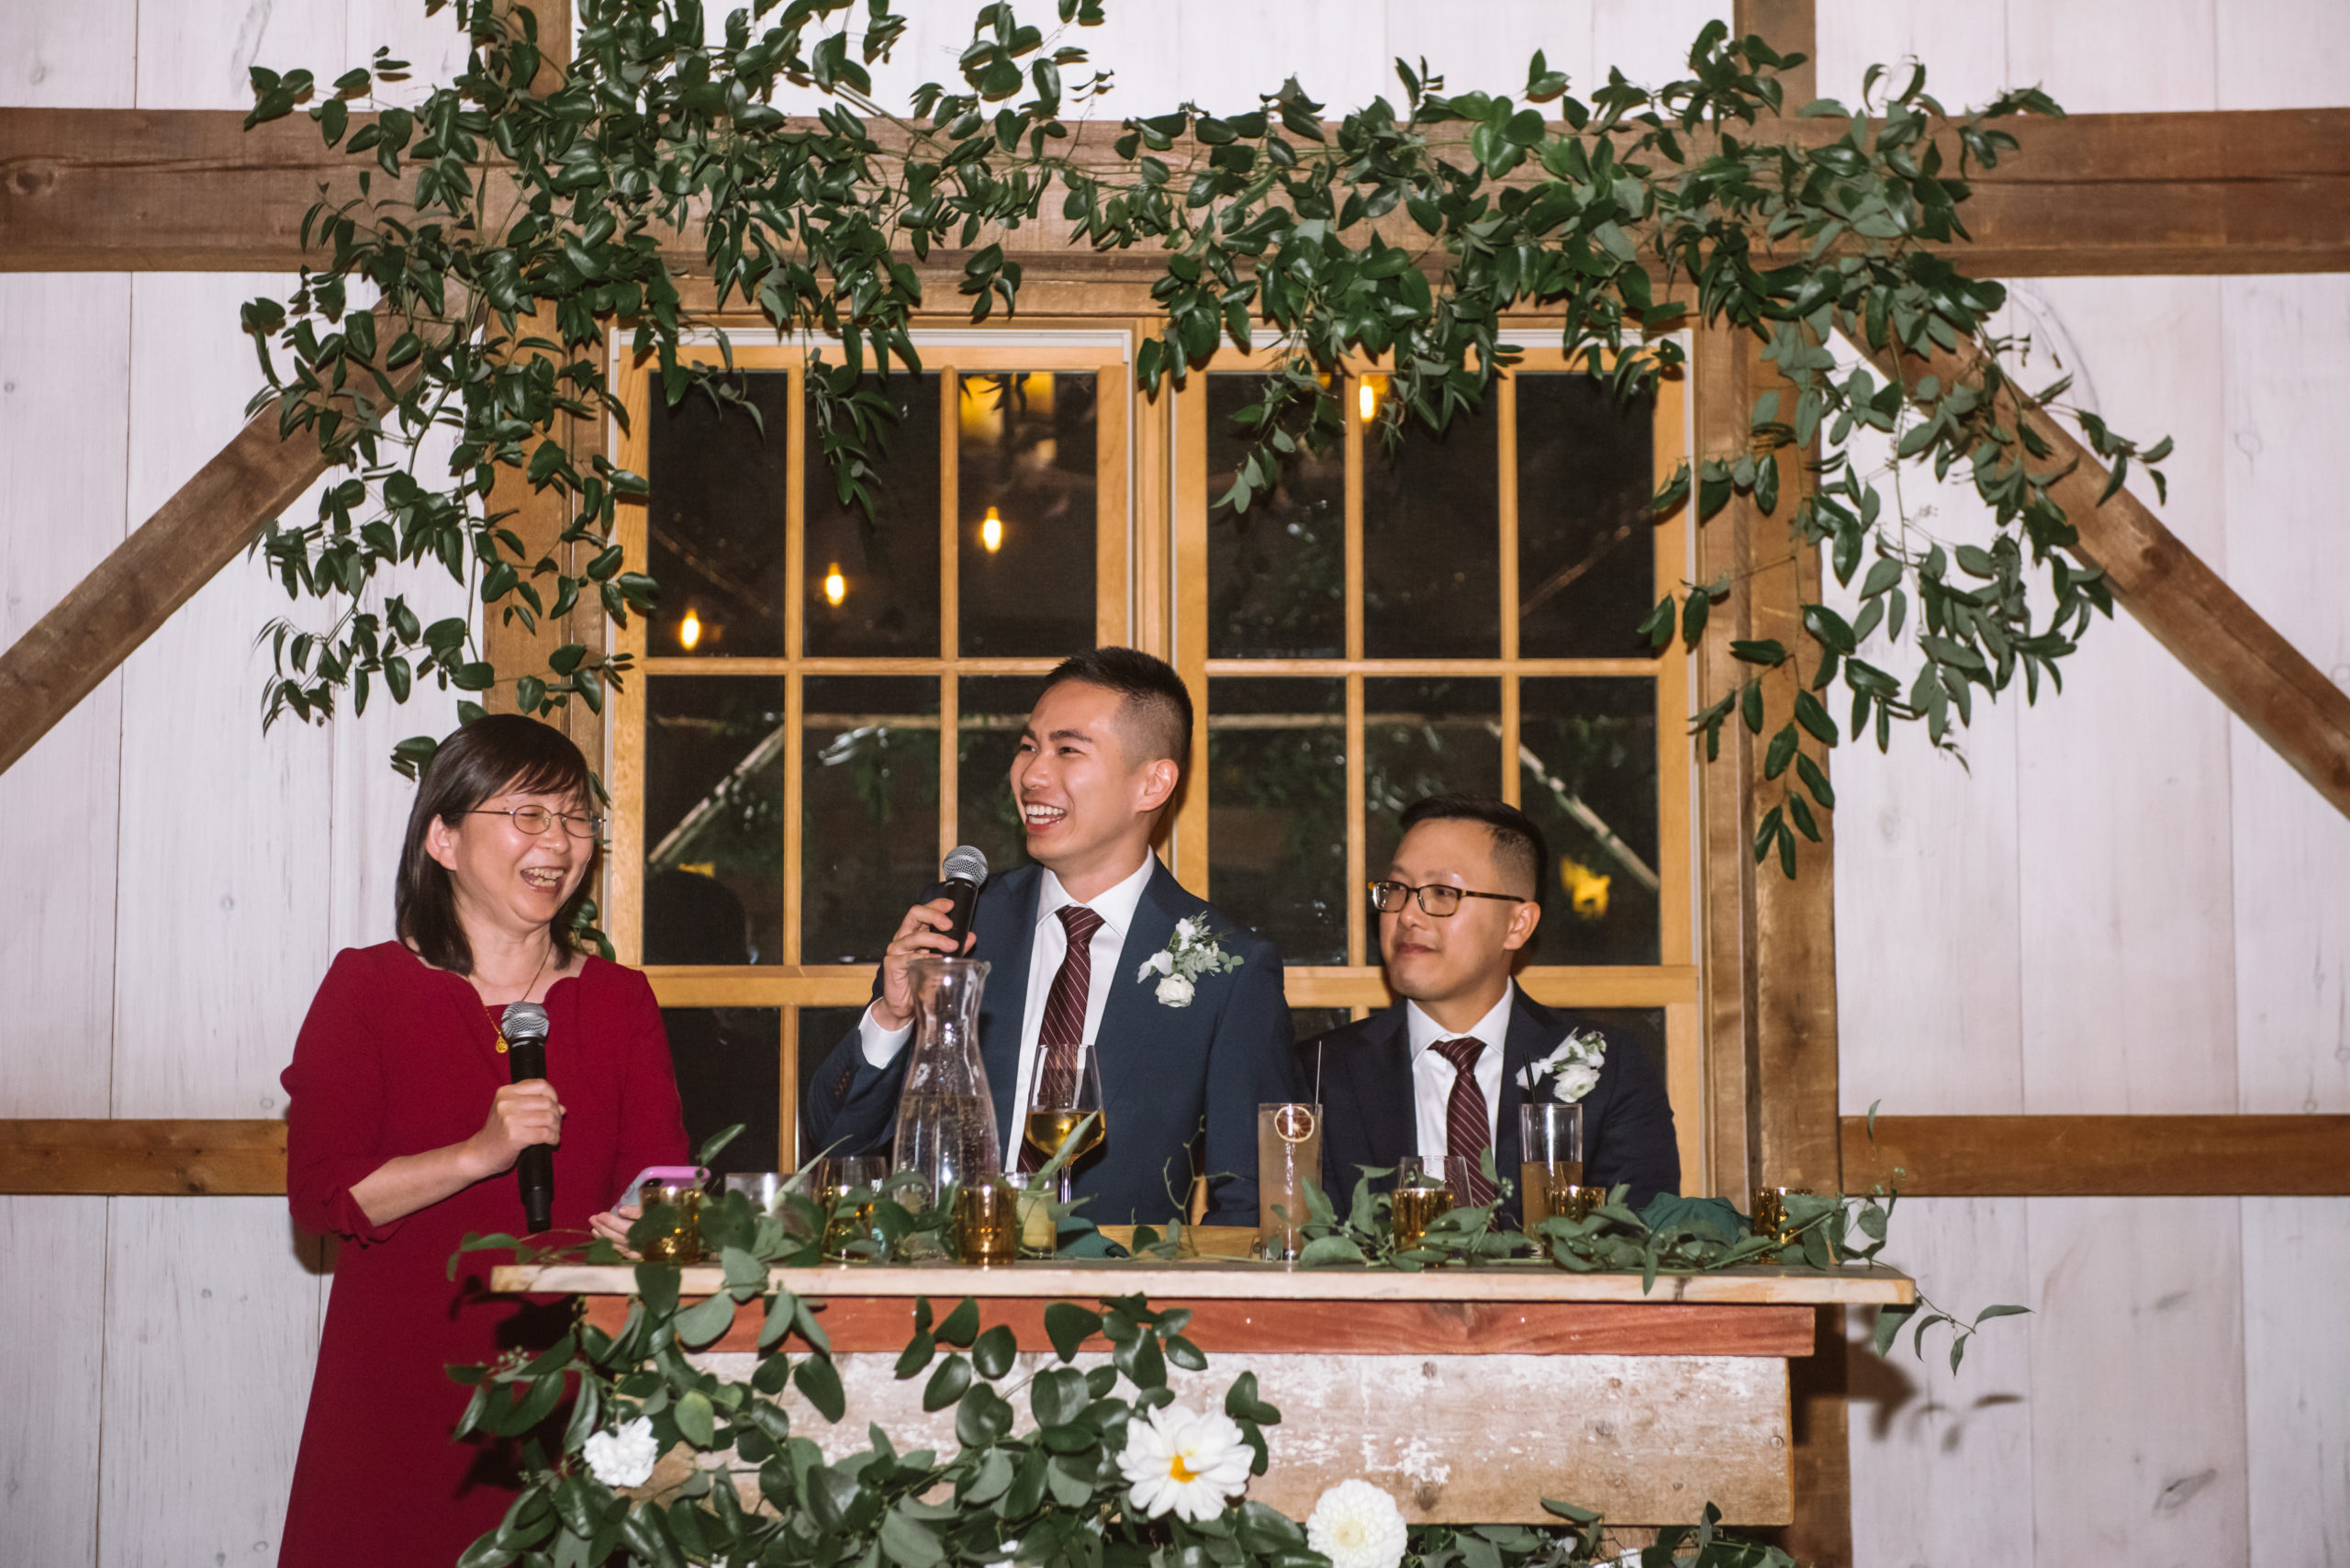 Two grooms at the head couple table (which is decorated with greenery as well as the wooden beam above them) with one of the groom's mothers. One of the grooms and his mother are giving a speech. One groom is looking off to his right, mouth open in a smile. He is holding a microphone. His husband is sitting to his left and is looking towards him with a soft smile.